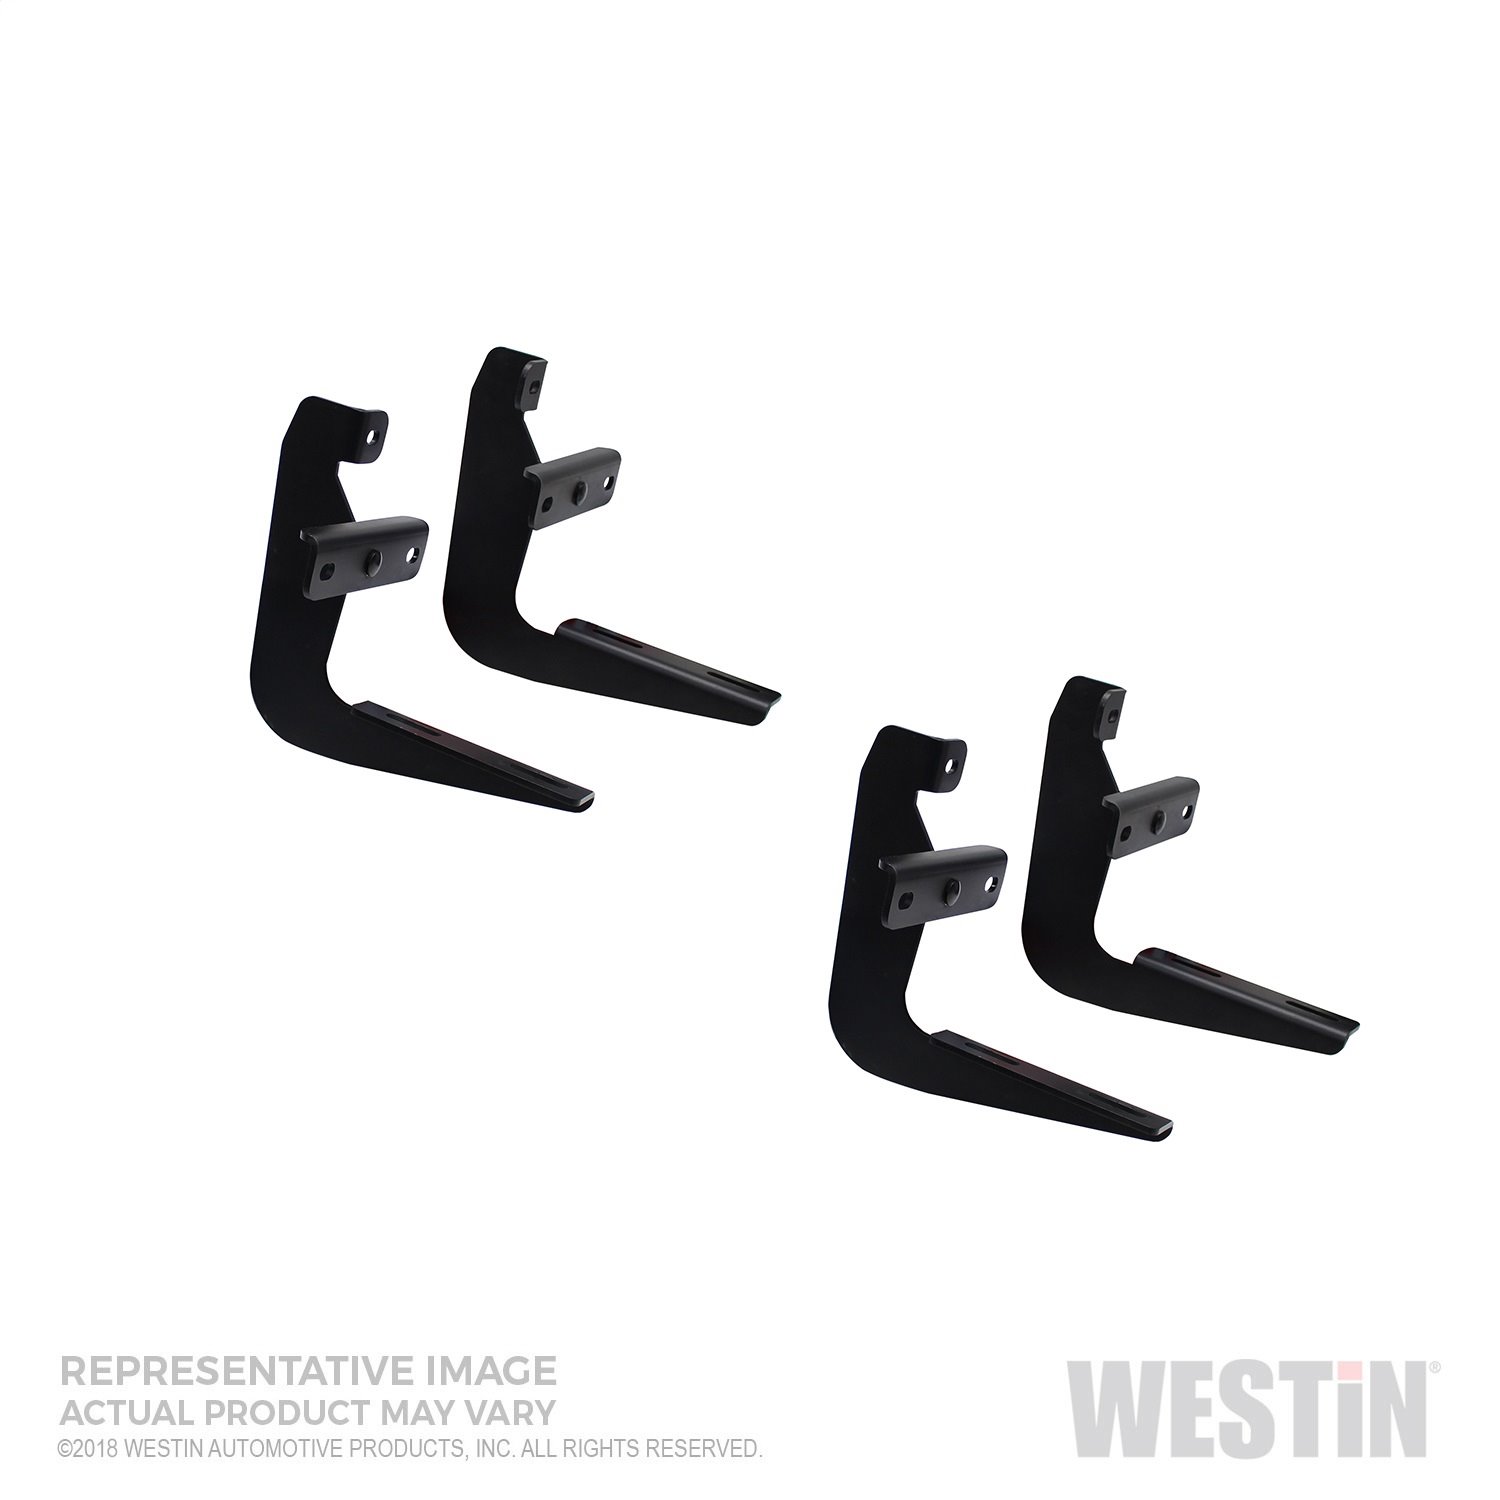 Mounting Hardware 2005-16 Toyota Tacoma, Extended & D Cabs